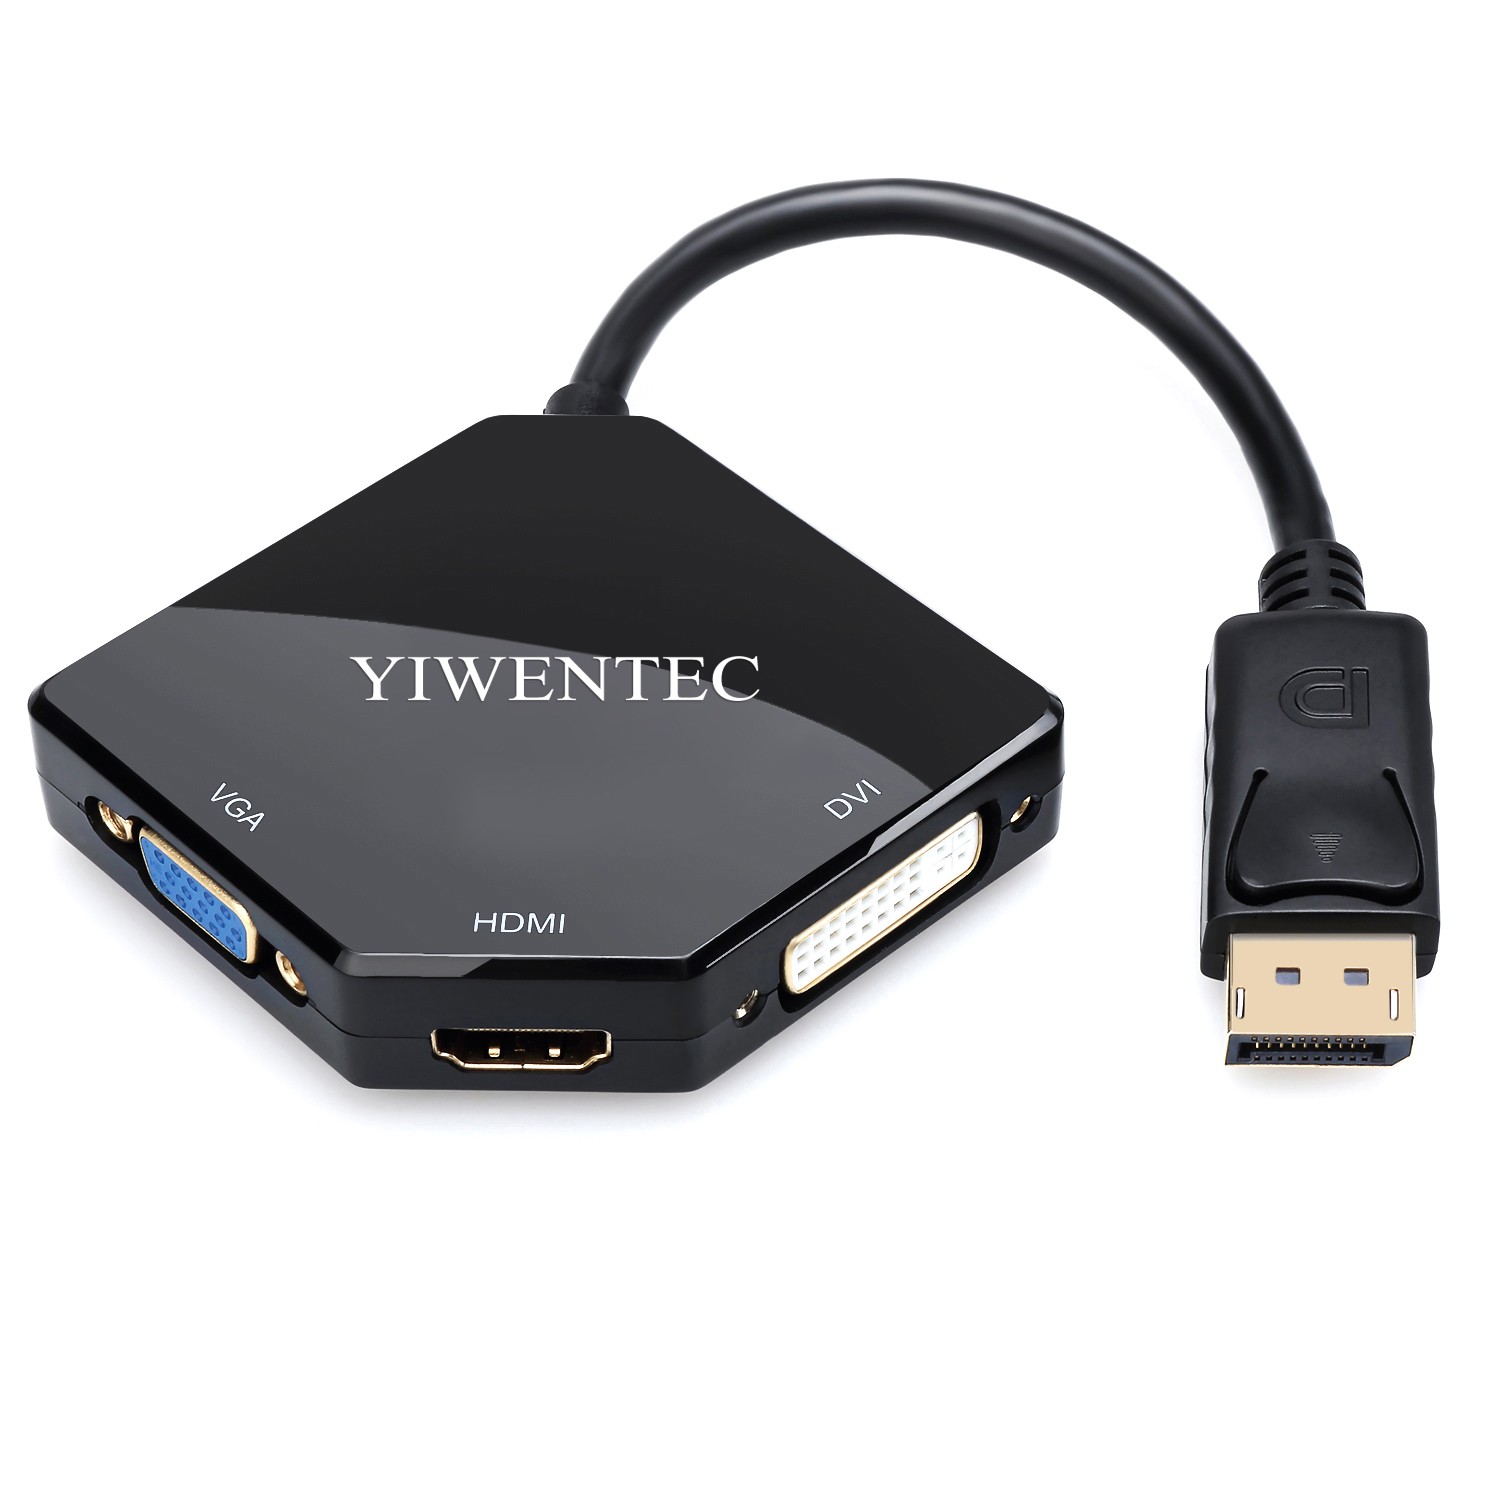 YIWENTEC displayport hub display Port to hdmi VGA DVI Adapter Cable Male to  Female multi-port Converter for pc Monitor Projector hdtv B0209-Multiport  Displayport to HDMI DVI VGA-YIWENTEC